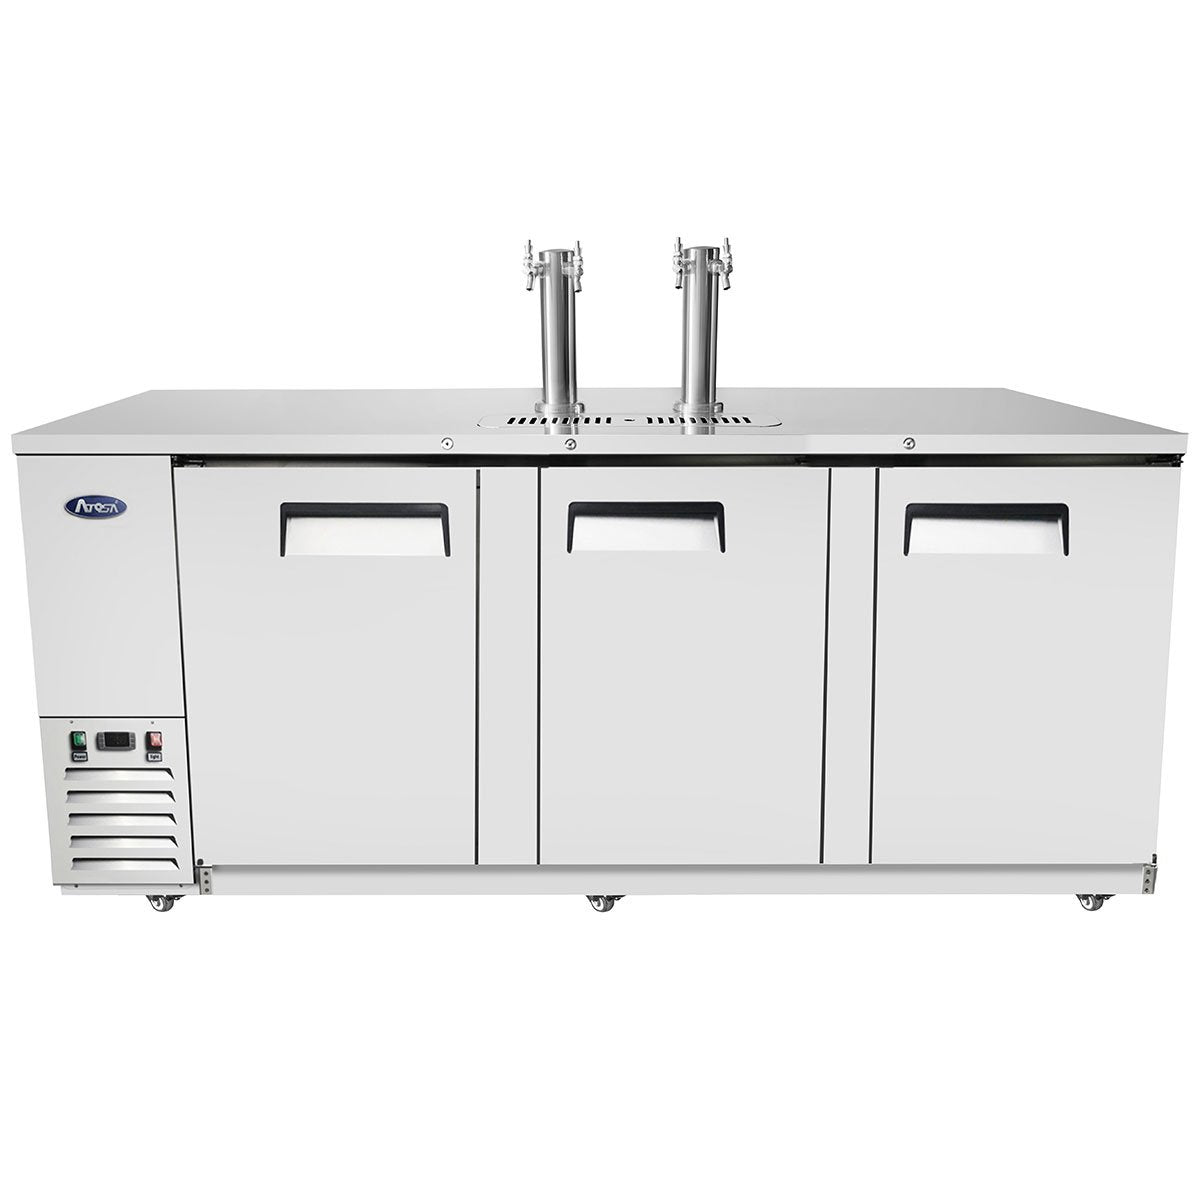 Atosa MKC90GR 90" Keg Cooler-Stainless Steel-with Dual Faucet